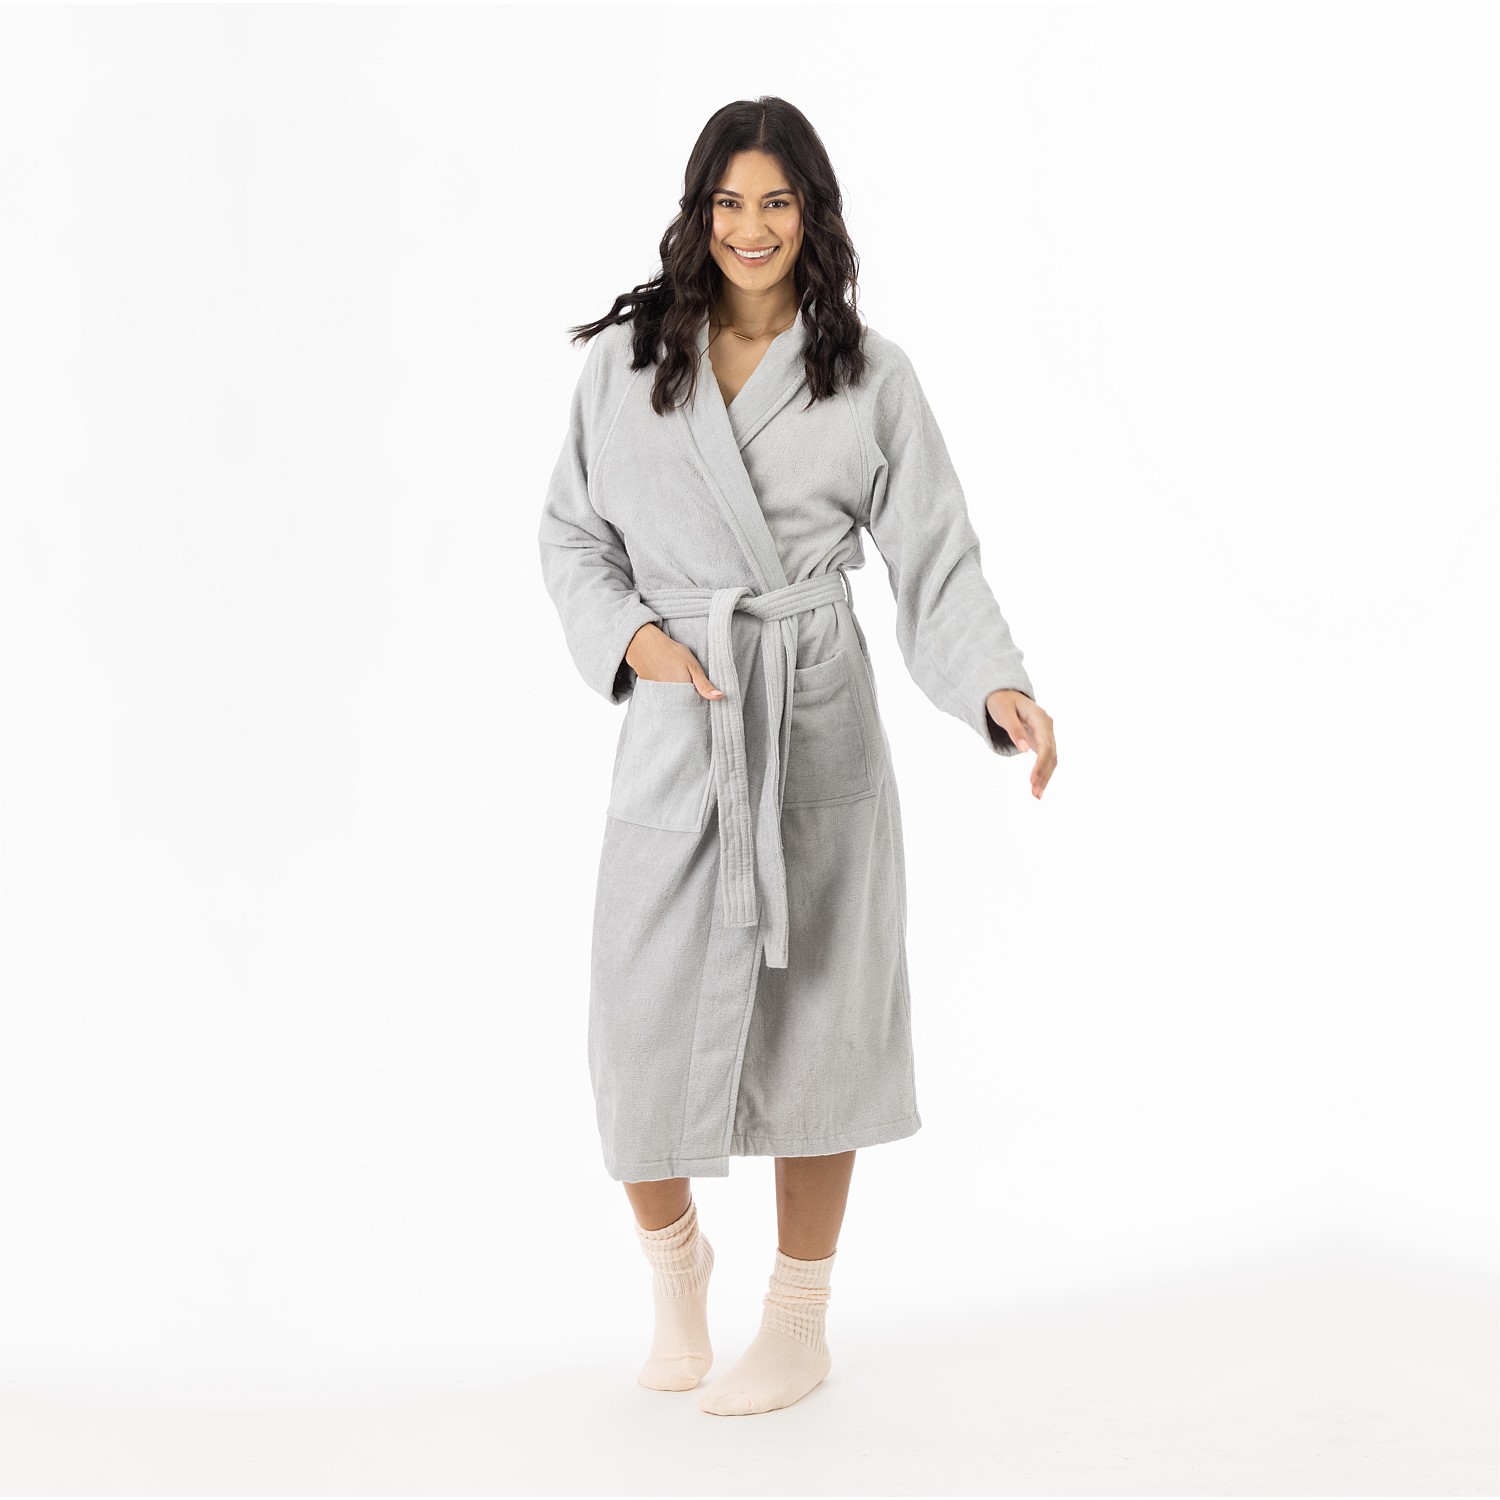 terry cloth robes from Kmart.com